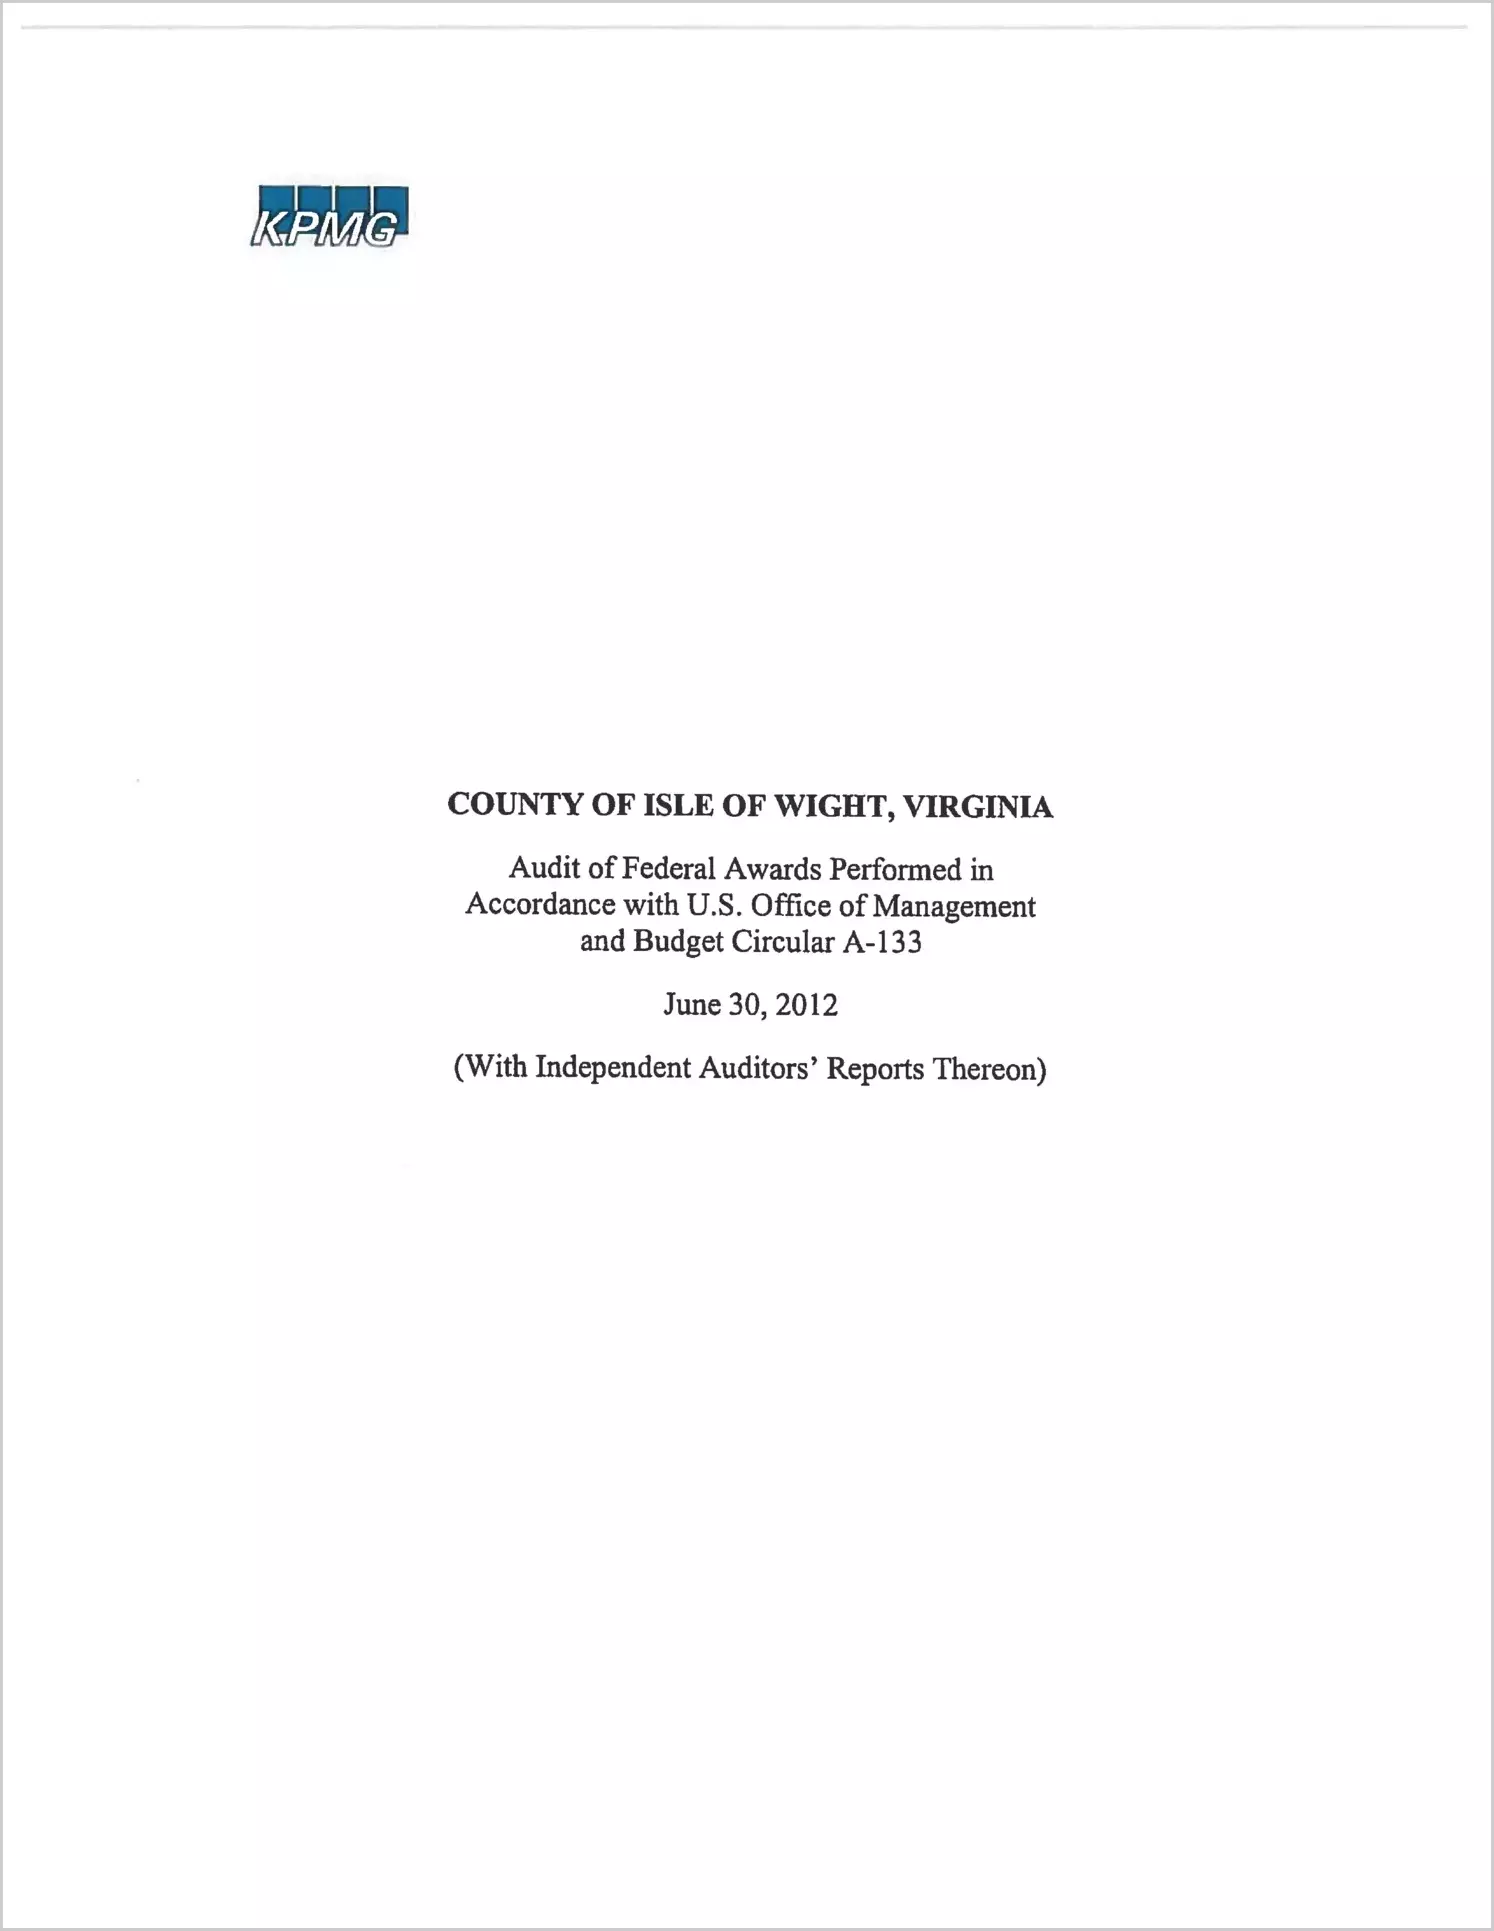 2012 Single Audit Report for County of Isle of Wight